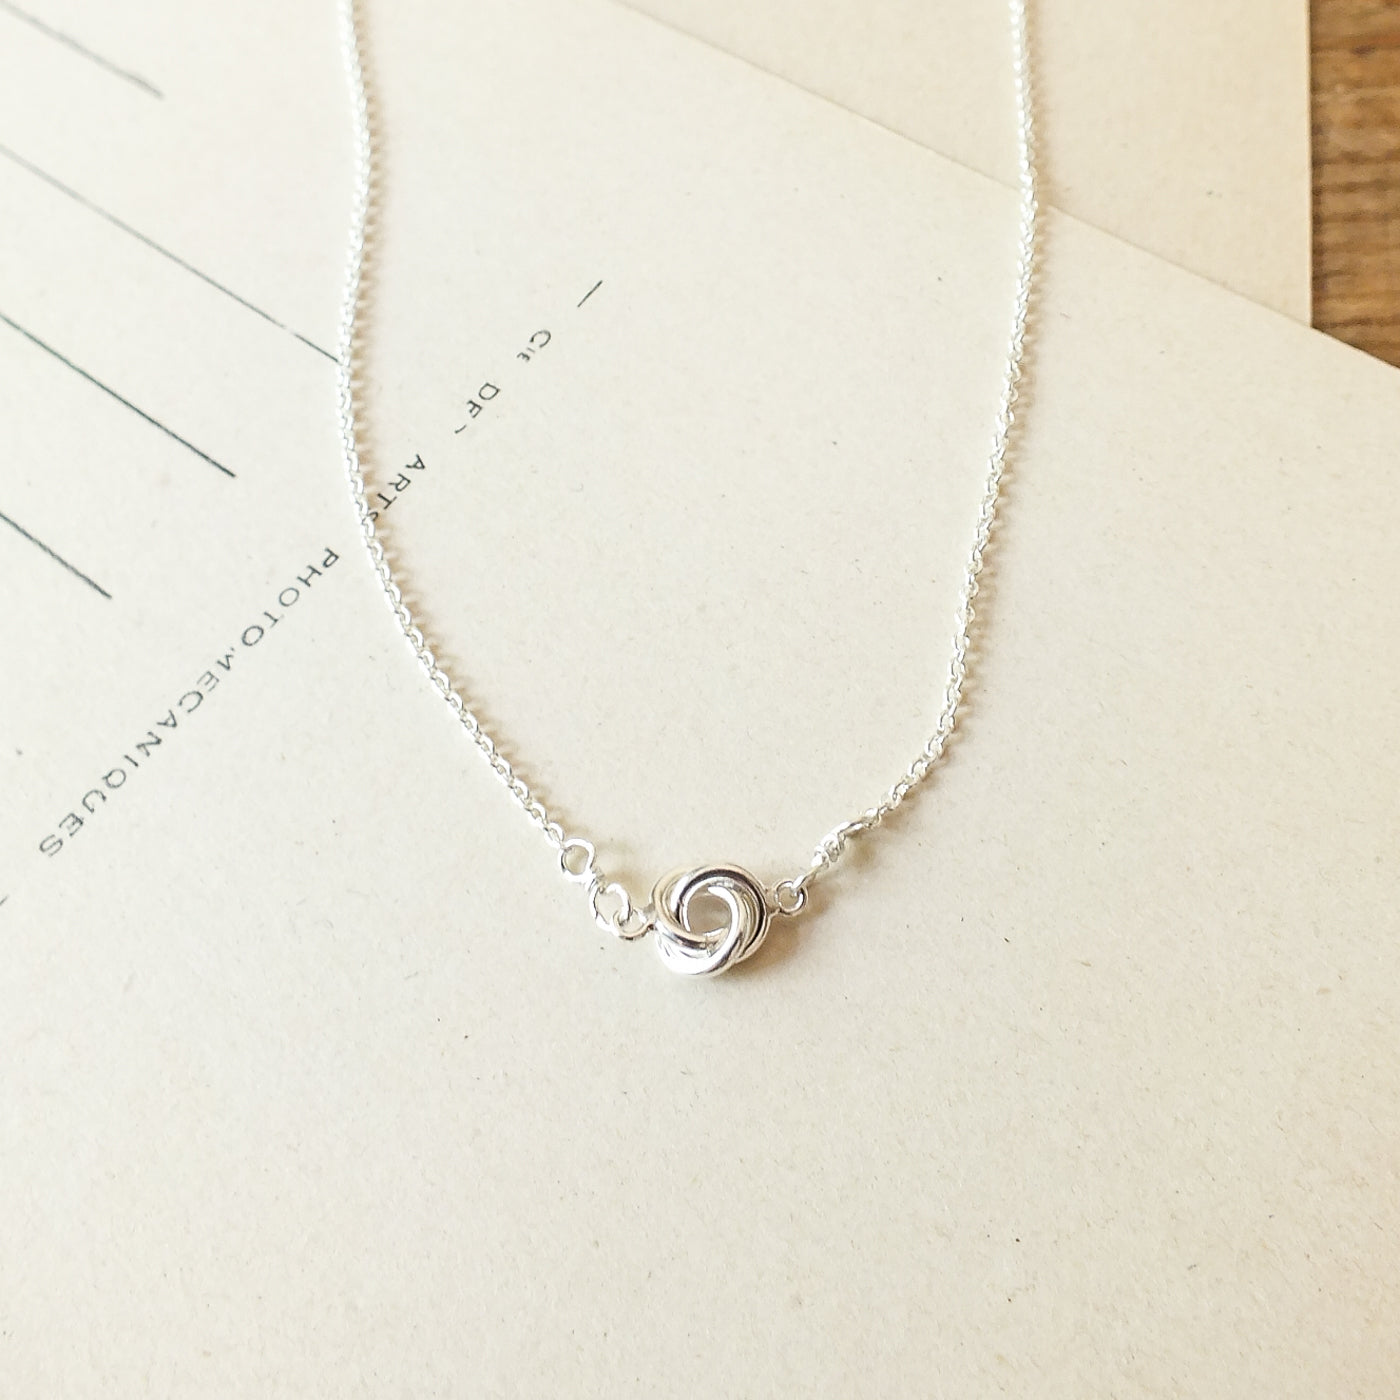 Becoming Jewelry&#39;s Love Knot Necklace with a swirl pendant on a wooden surface.